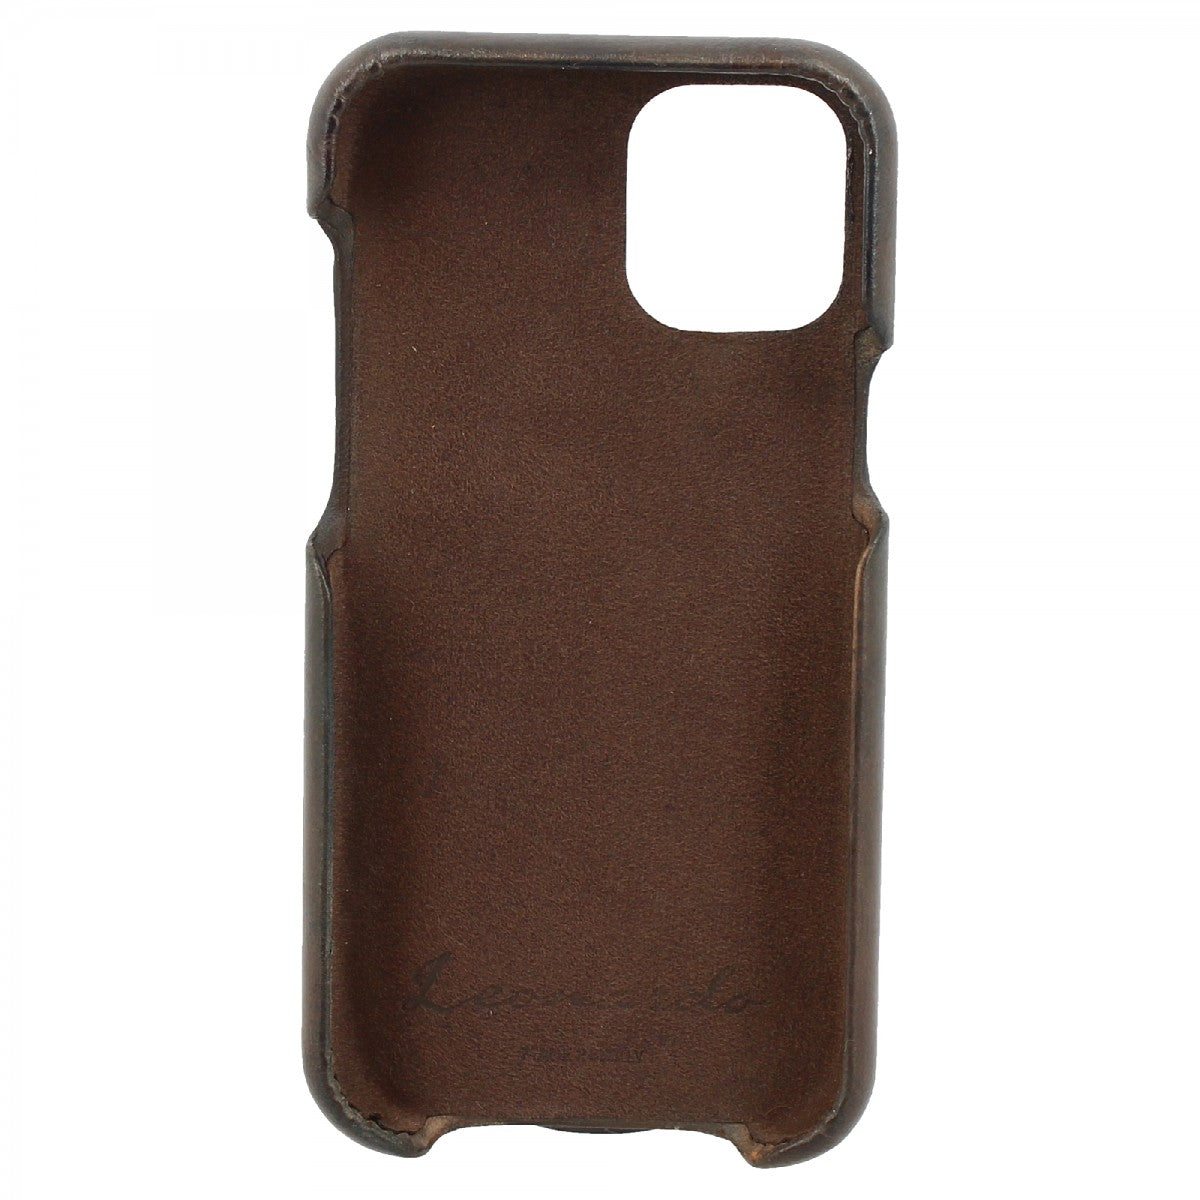 iPhone cover in hand-buffered dark brown LEATHER